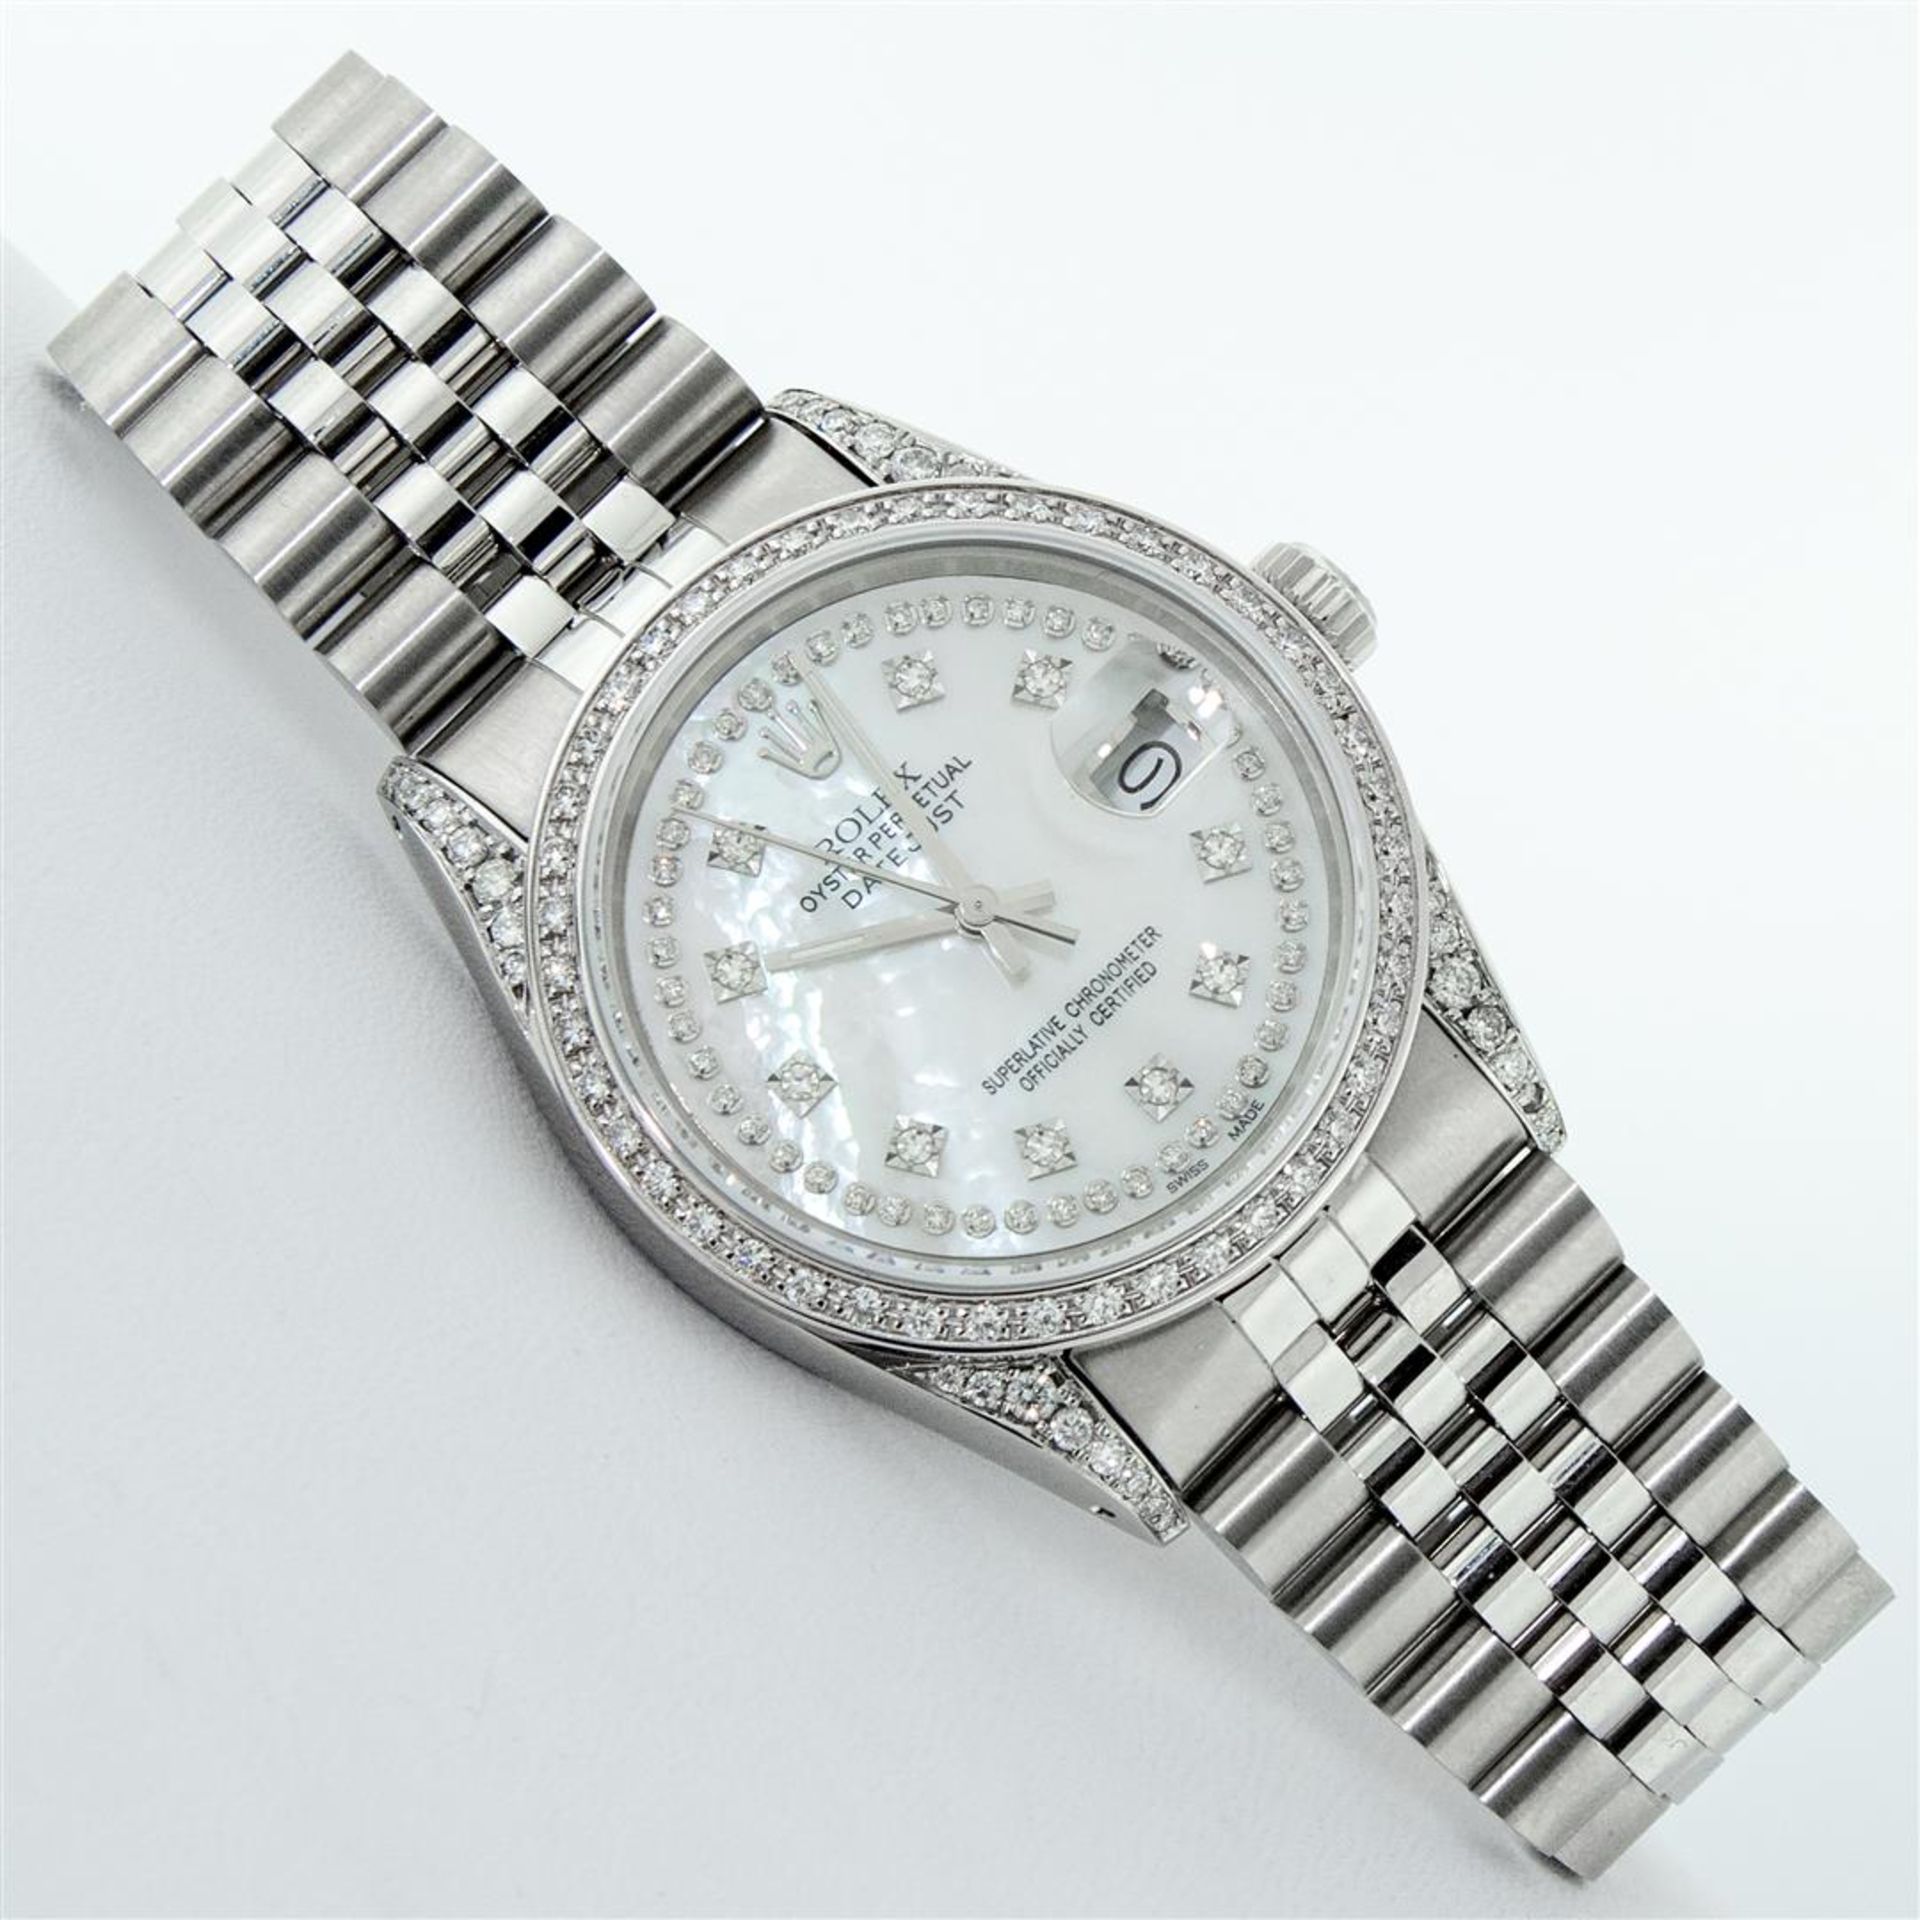 Rolex Mens Stainless Steel Mother Of Pearl Diamond Lugs Datejust Wristwatch - Image 3 of 9